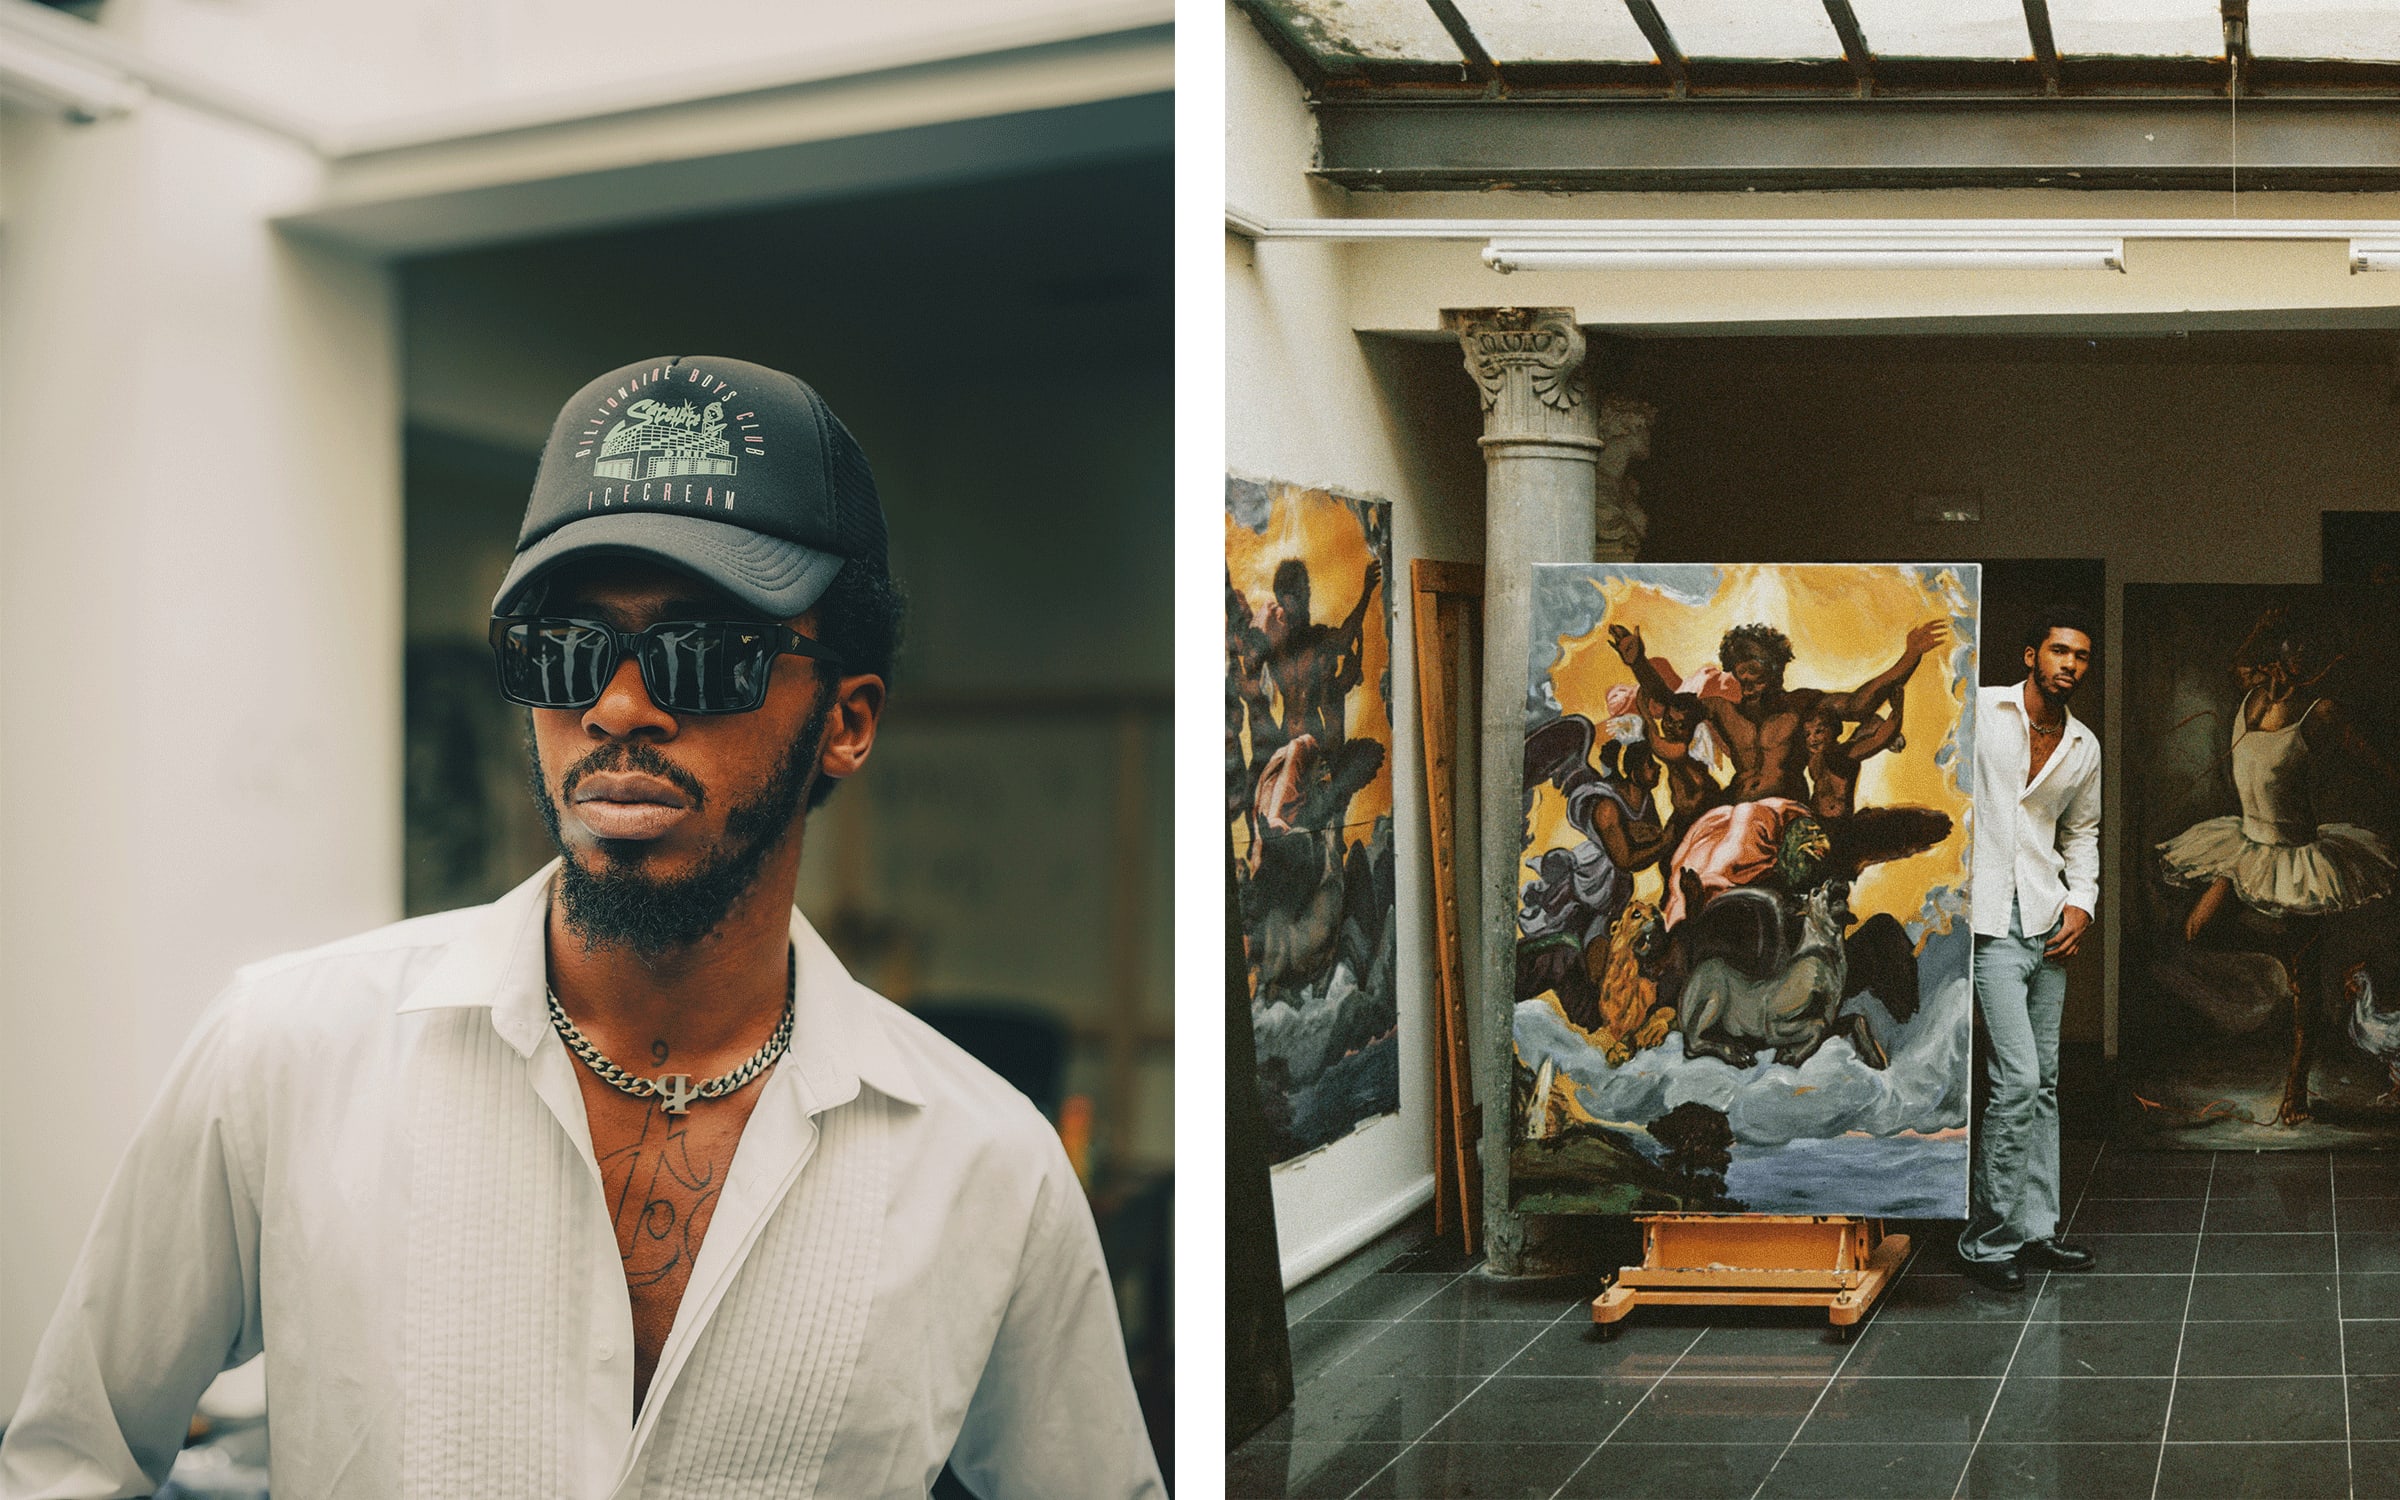 Artist Thelonious Stokes in his studio. Photographs by Julius Hirtzberger for Art Basel.